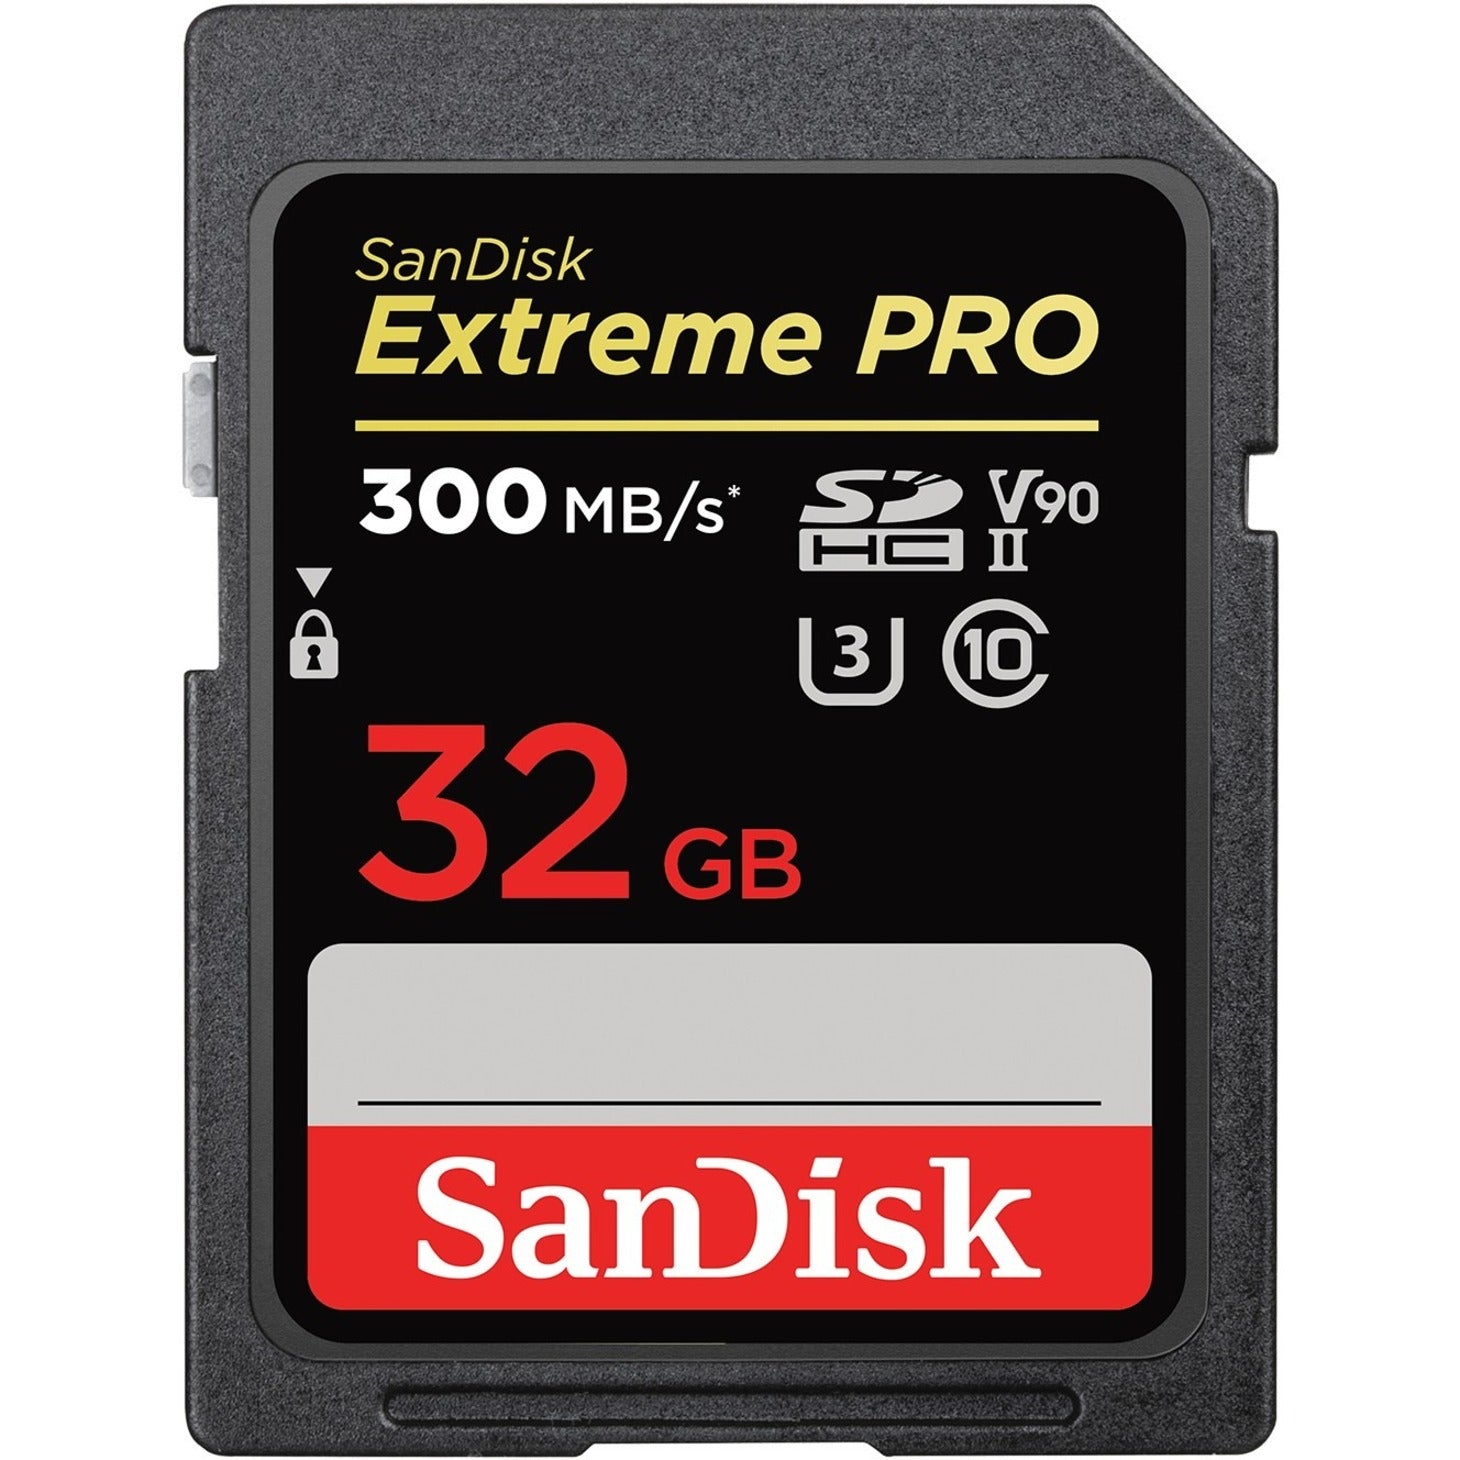 SanDisk SDSDXDK-032G-ANCIN Extreme PRO SDHC UHS-II - 32GB, 300MB/s Read Speed, 260MB/s Write Speed